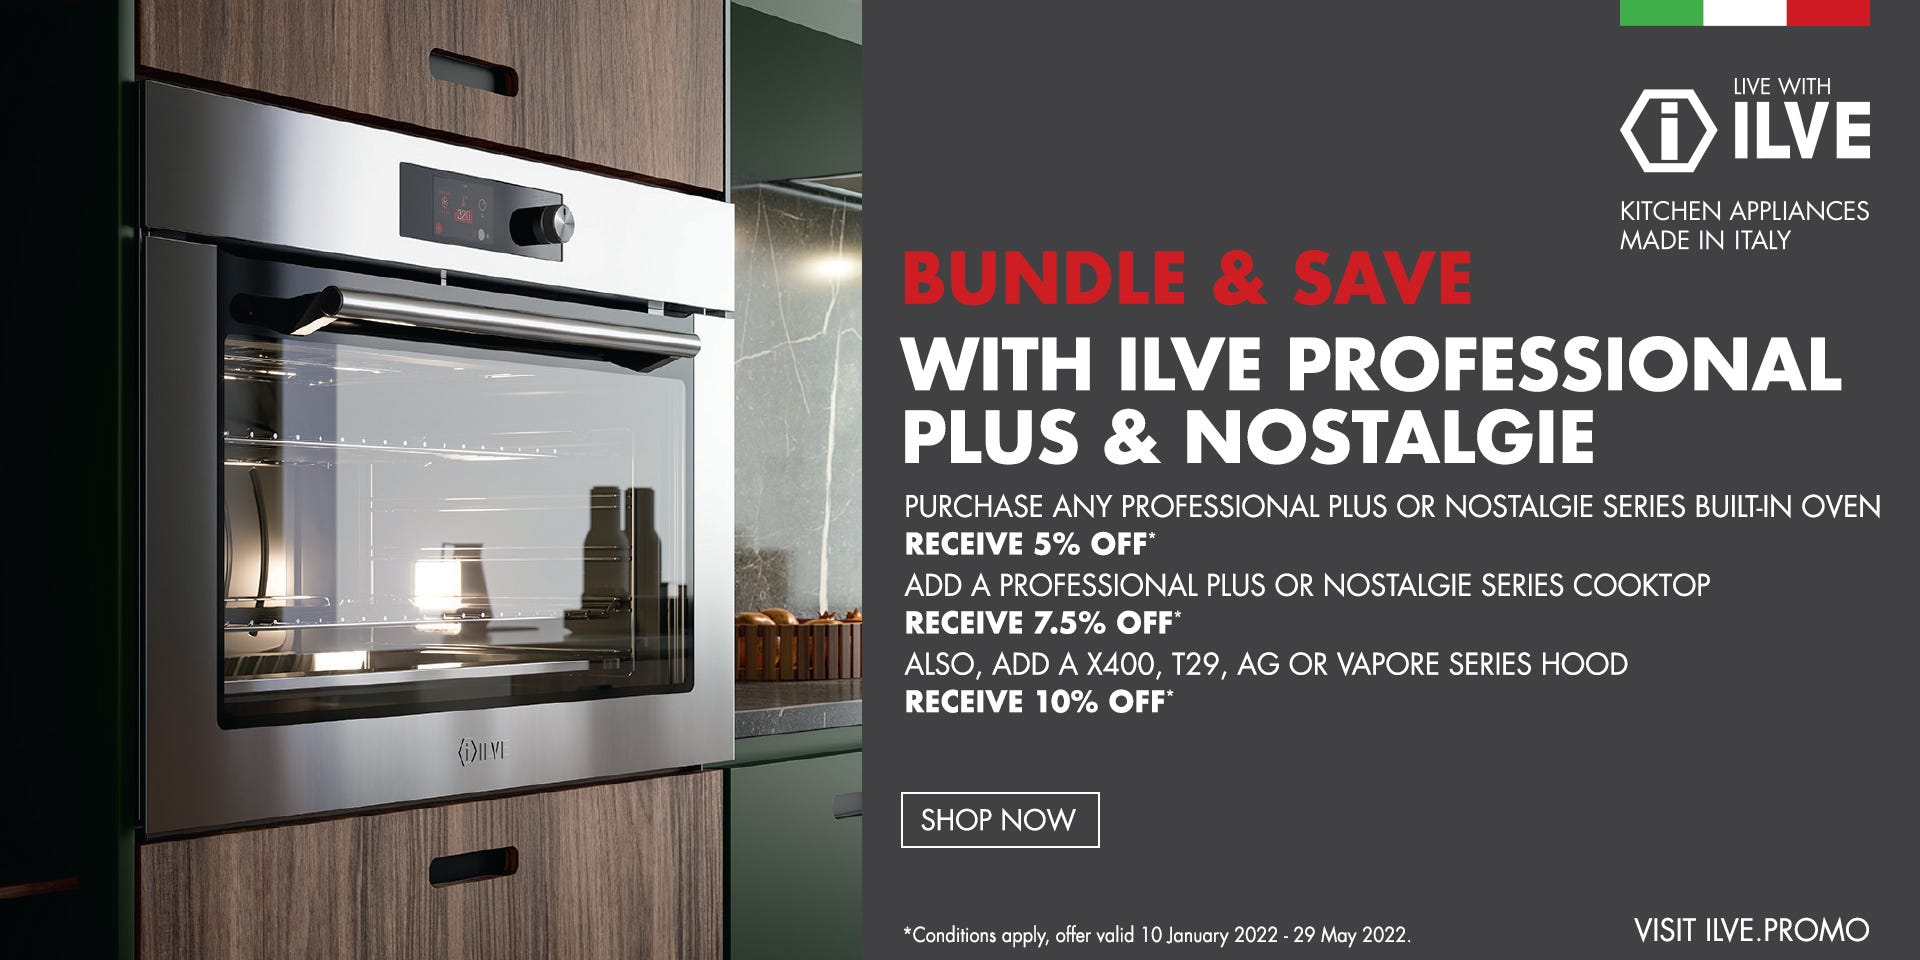 Bundle and save with ILVE Professional Plus and Nostalgie appliances. Offer ends 29/05/22. Find out more at an e&s near you today.